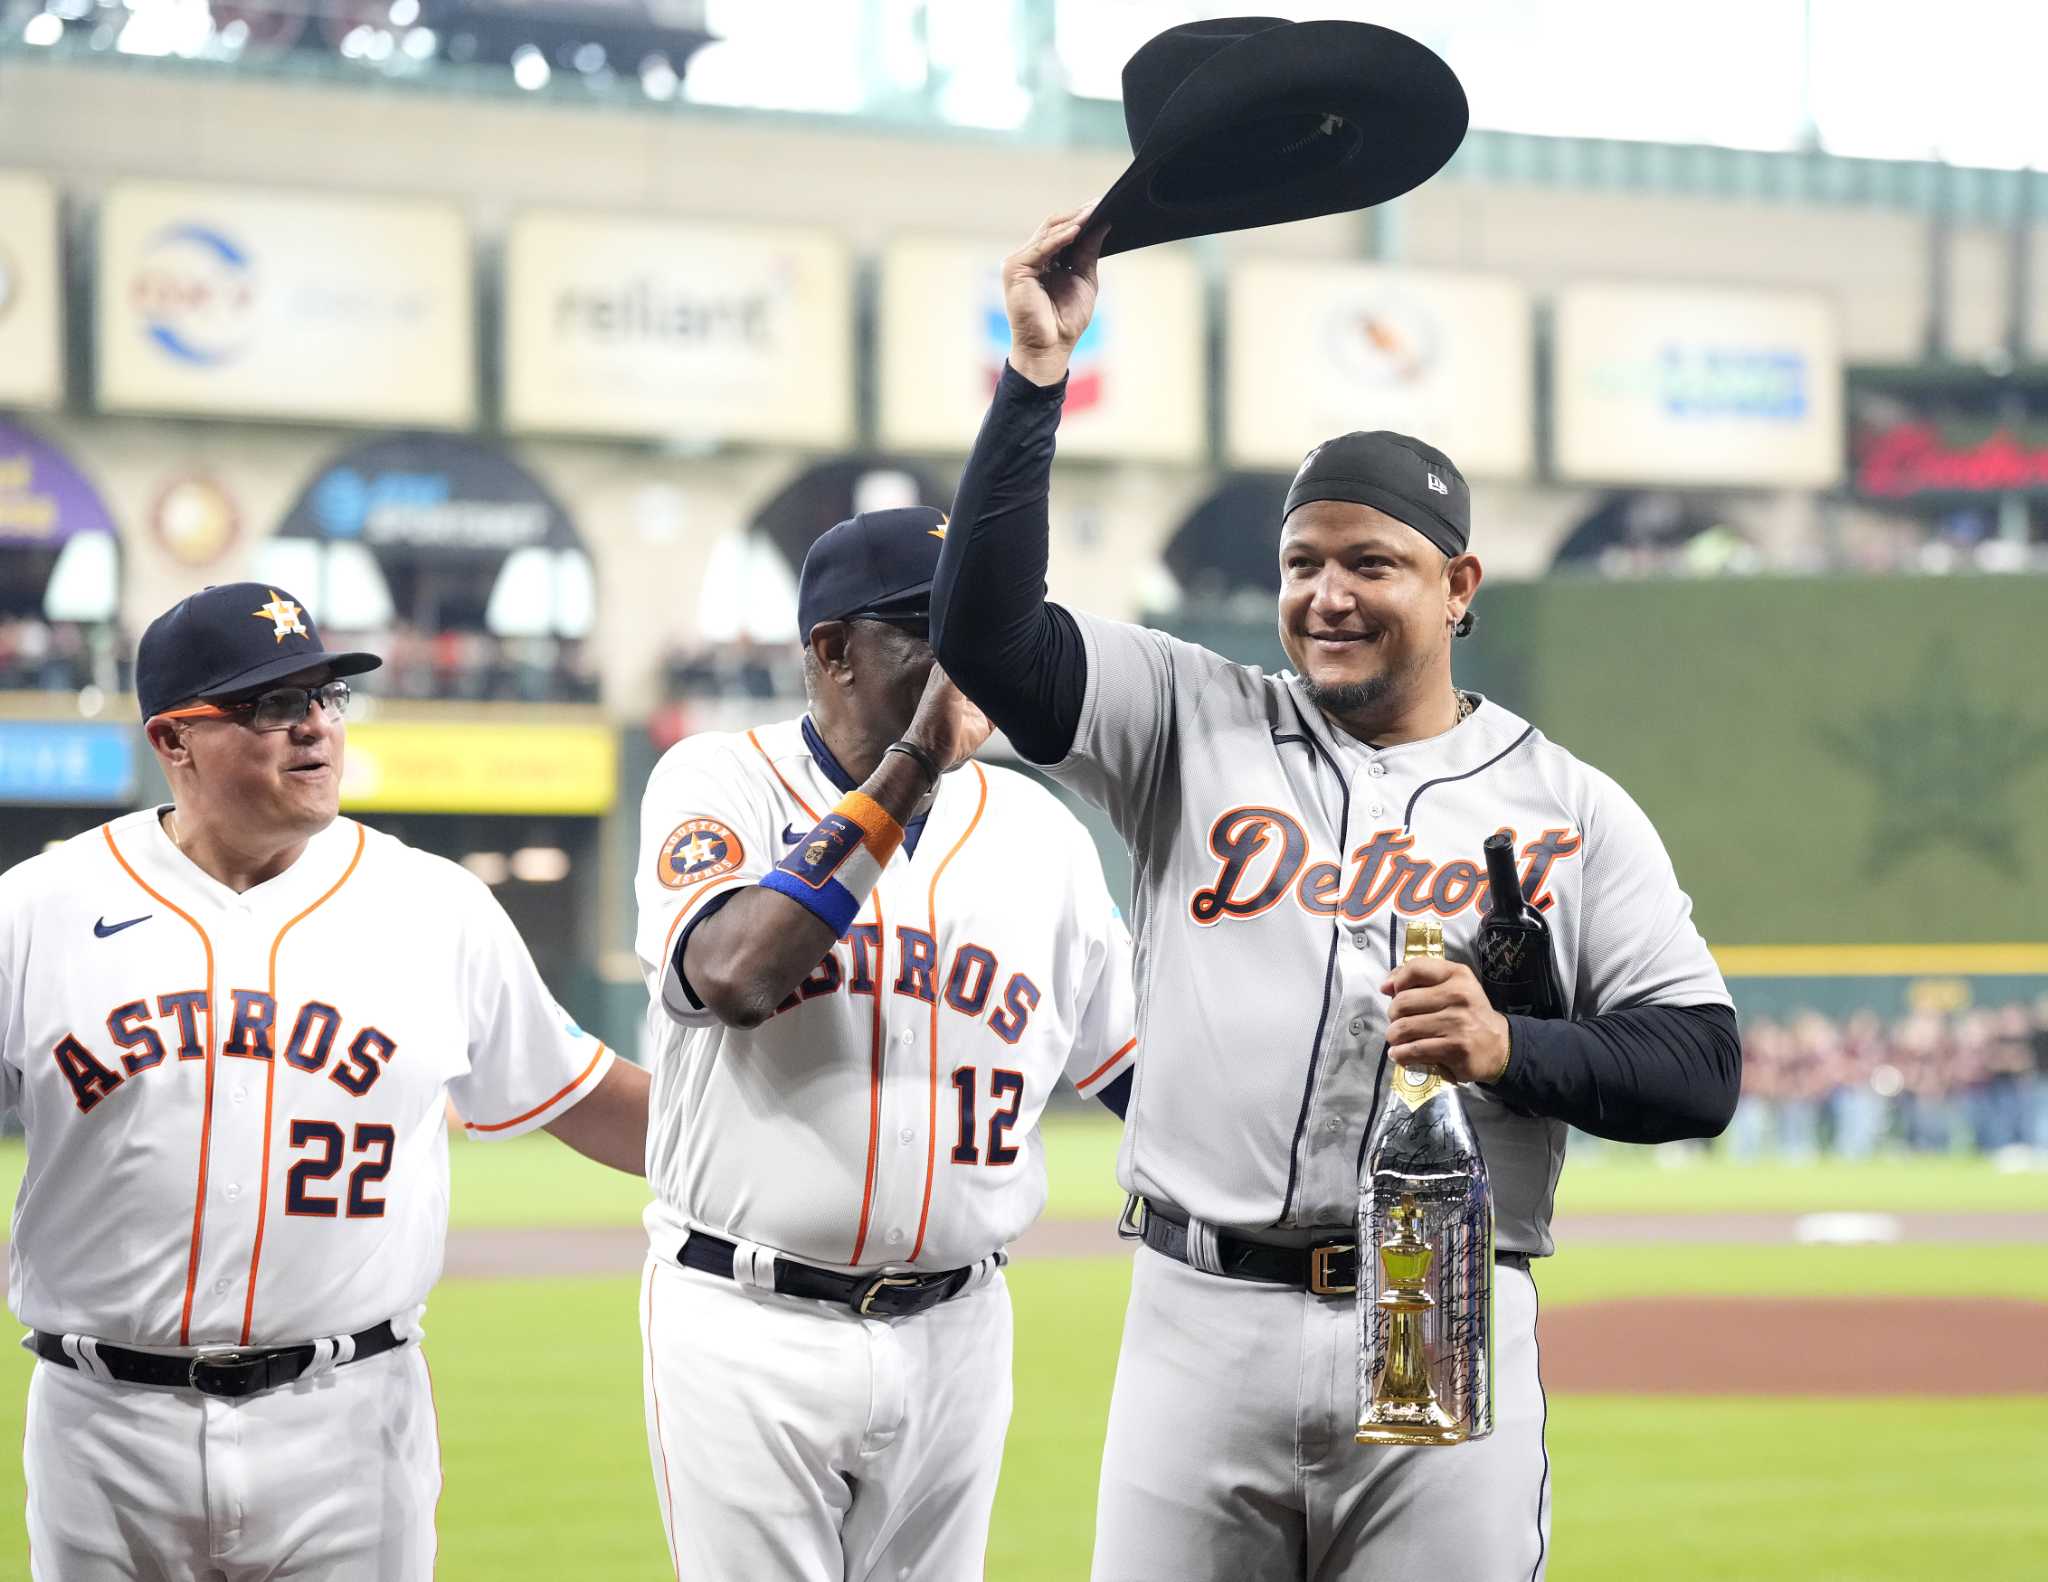 Miguel Cabrera could be the last 3,000-hit player for a while